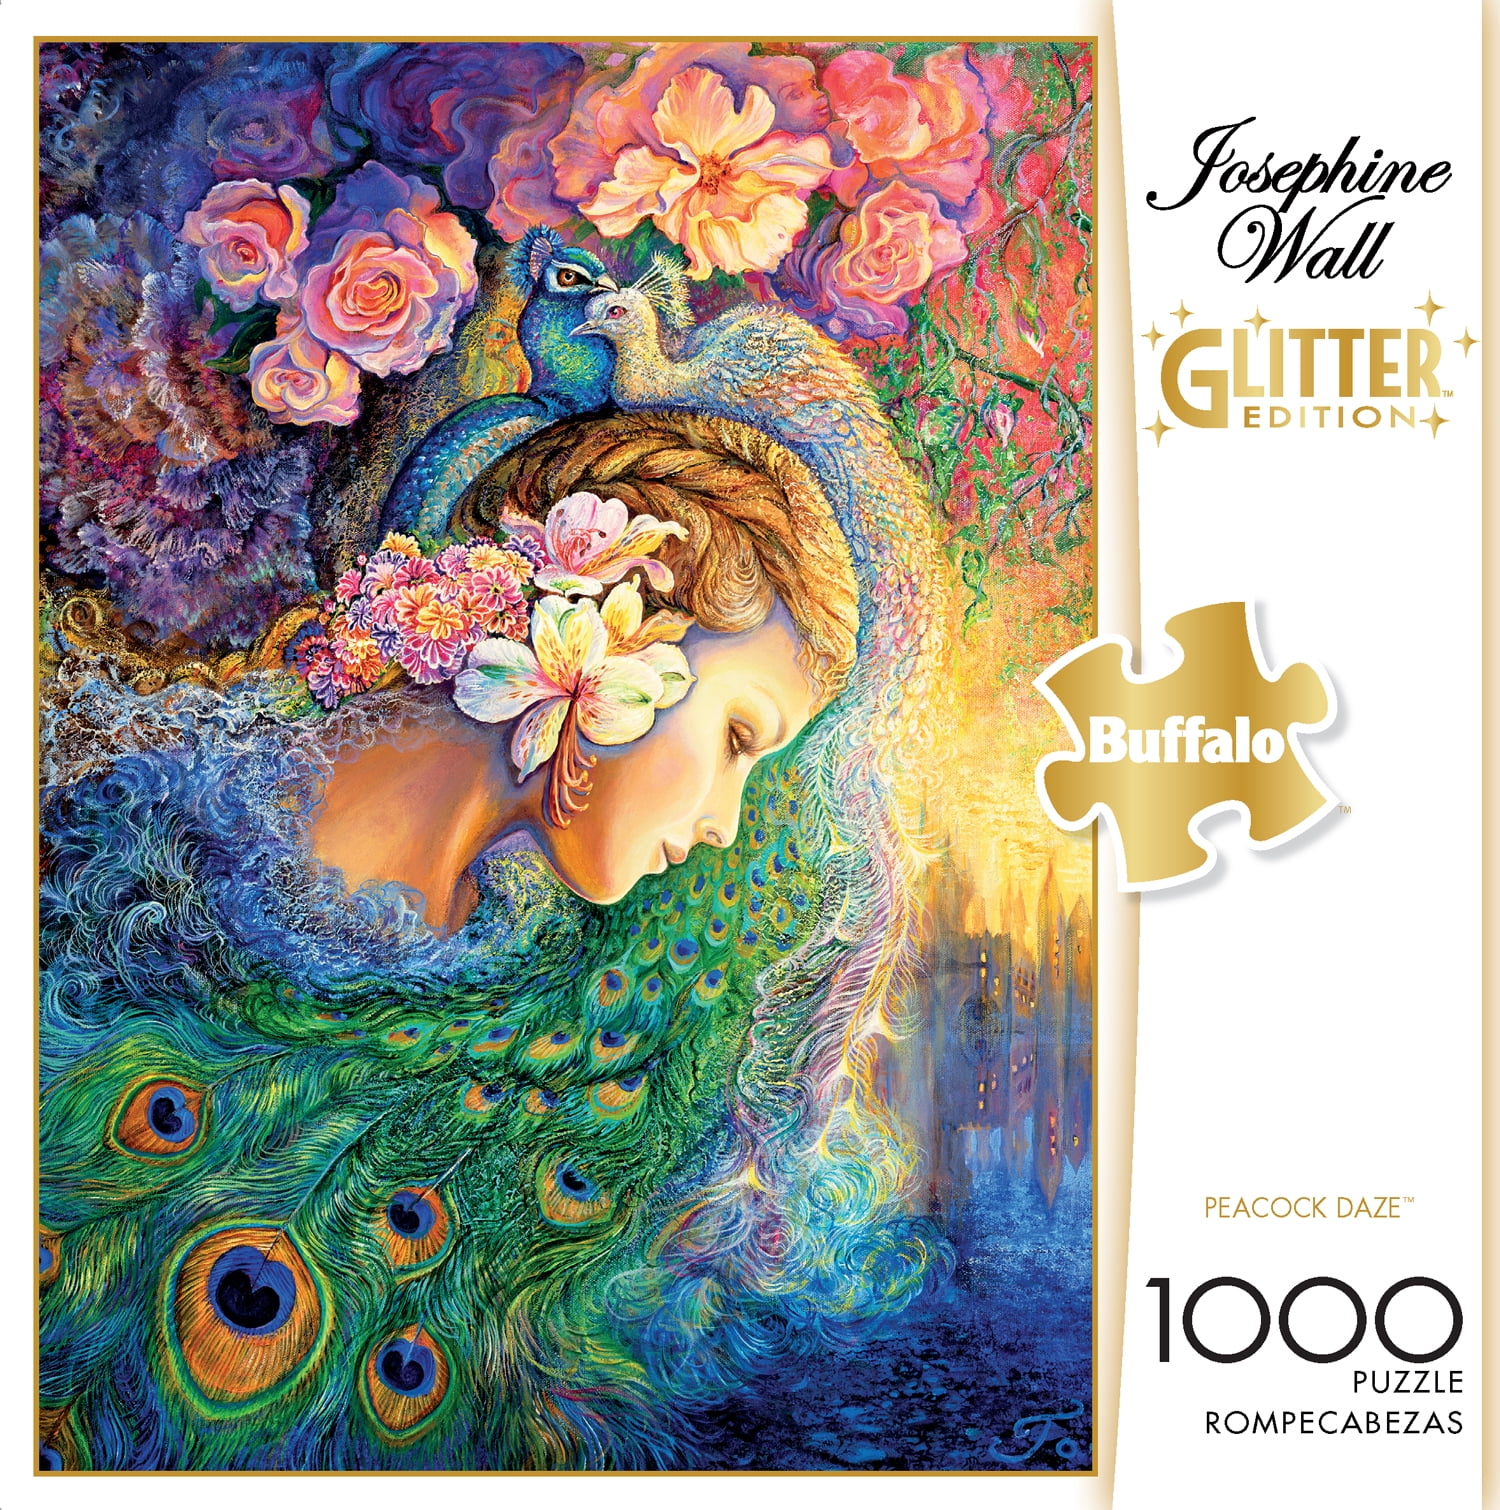 New. Details about   Buffalo Games Jigsaw Puzzle Josephine Wall Sadness of Gaia.1000 pieces 